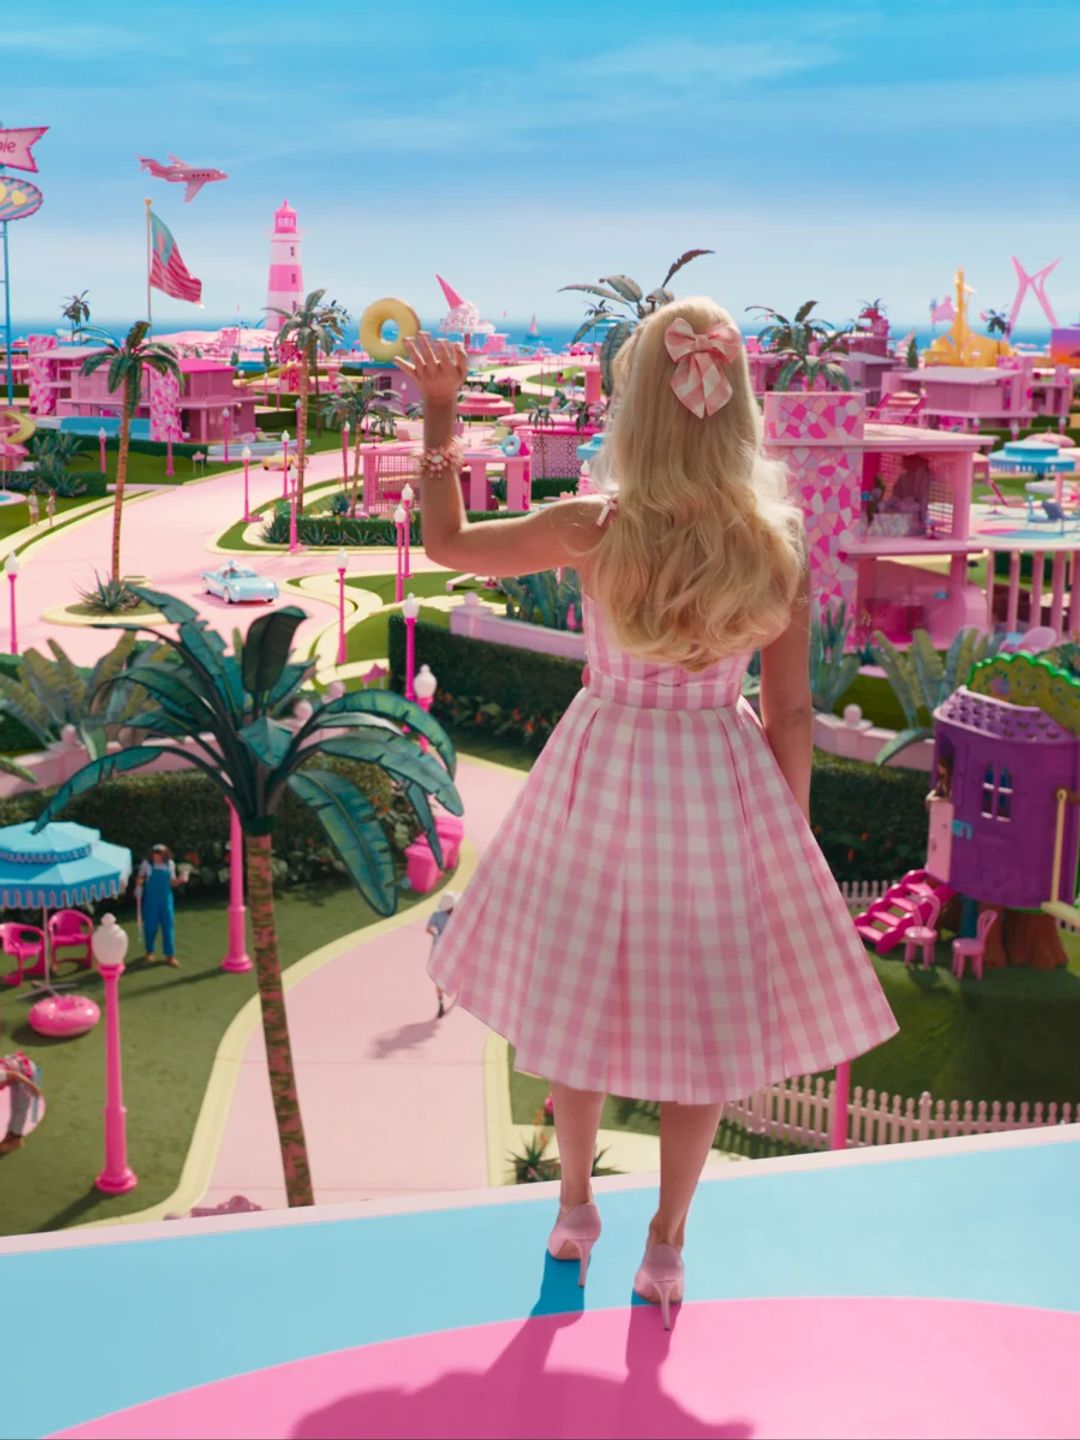 Margot Robbie dressed as Barbie with pink gingham outfit and hair bow